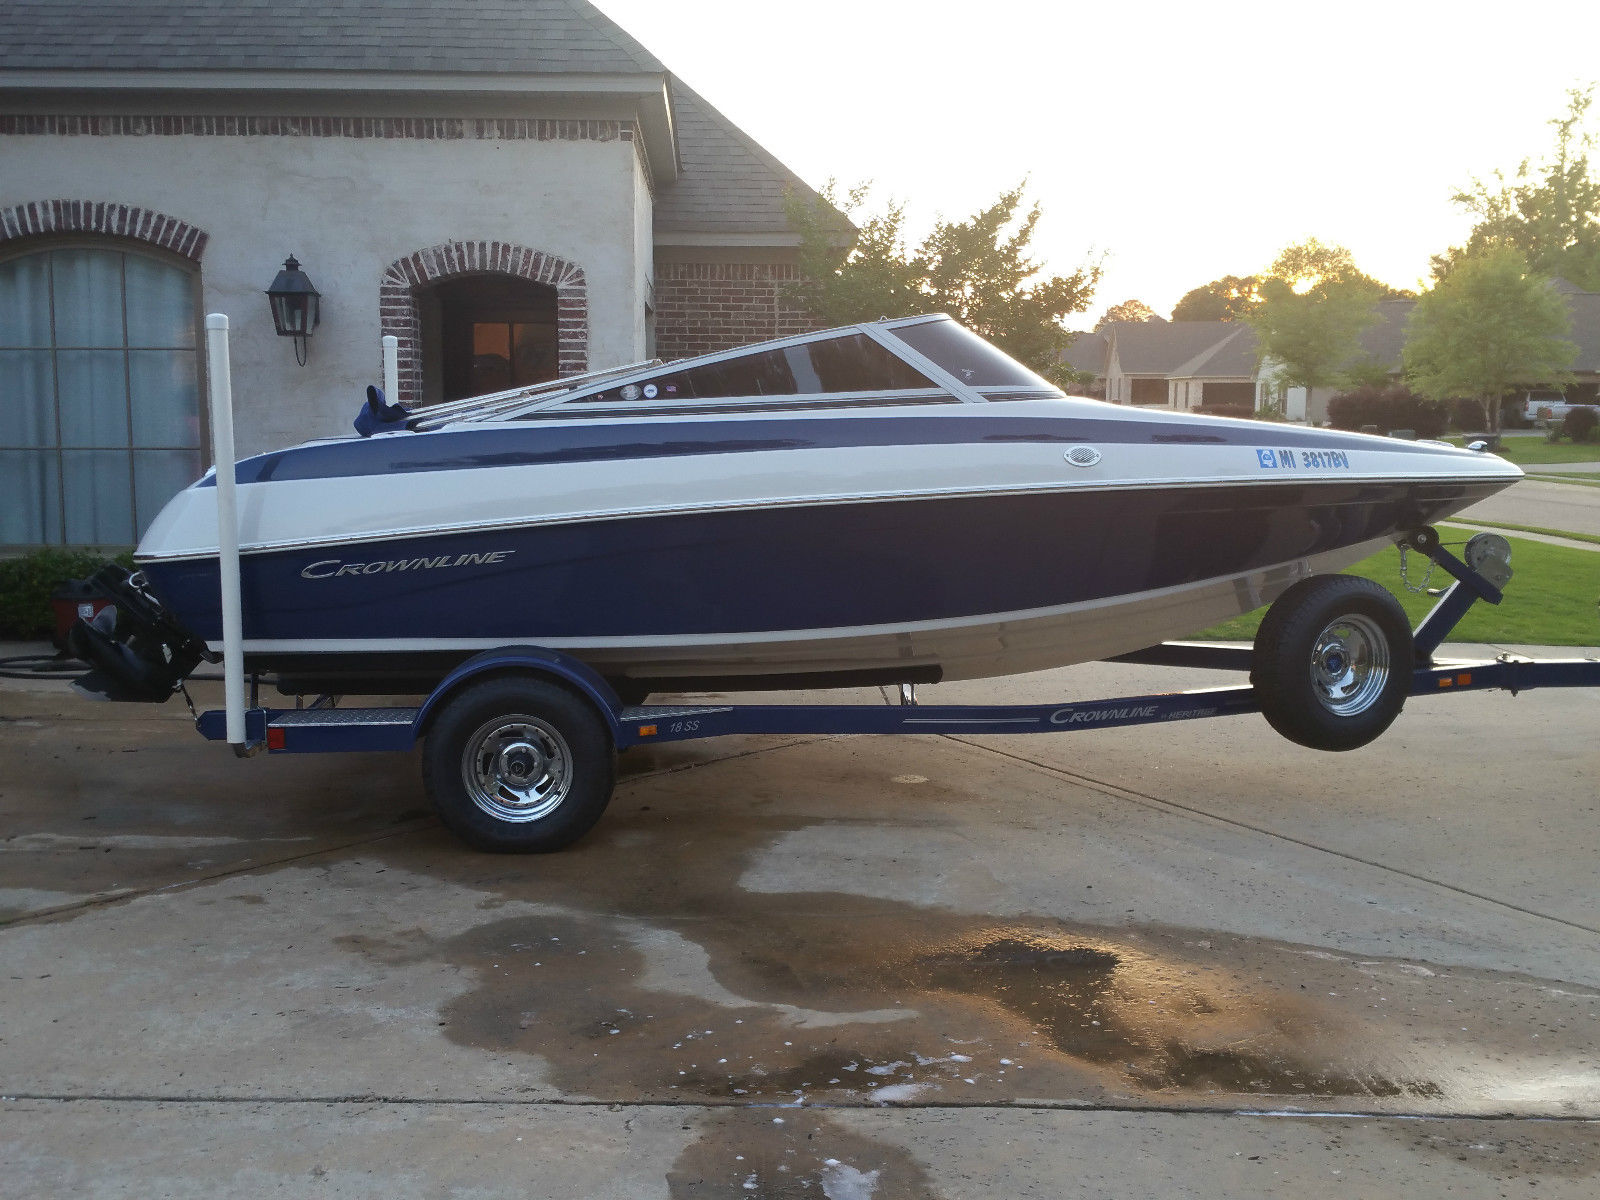 Crownline 18SS 2011 for sale for $18,500 - Boats-from-USA.com